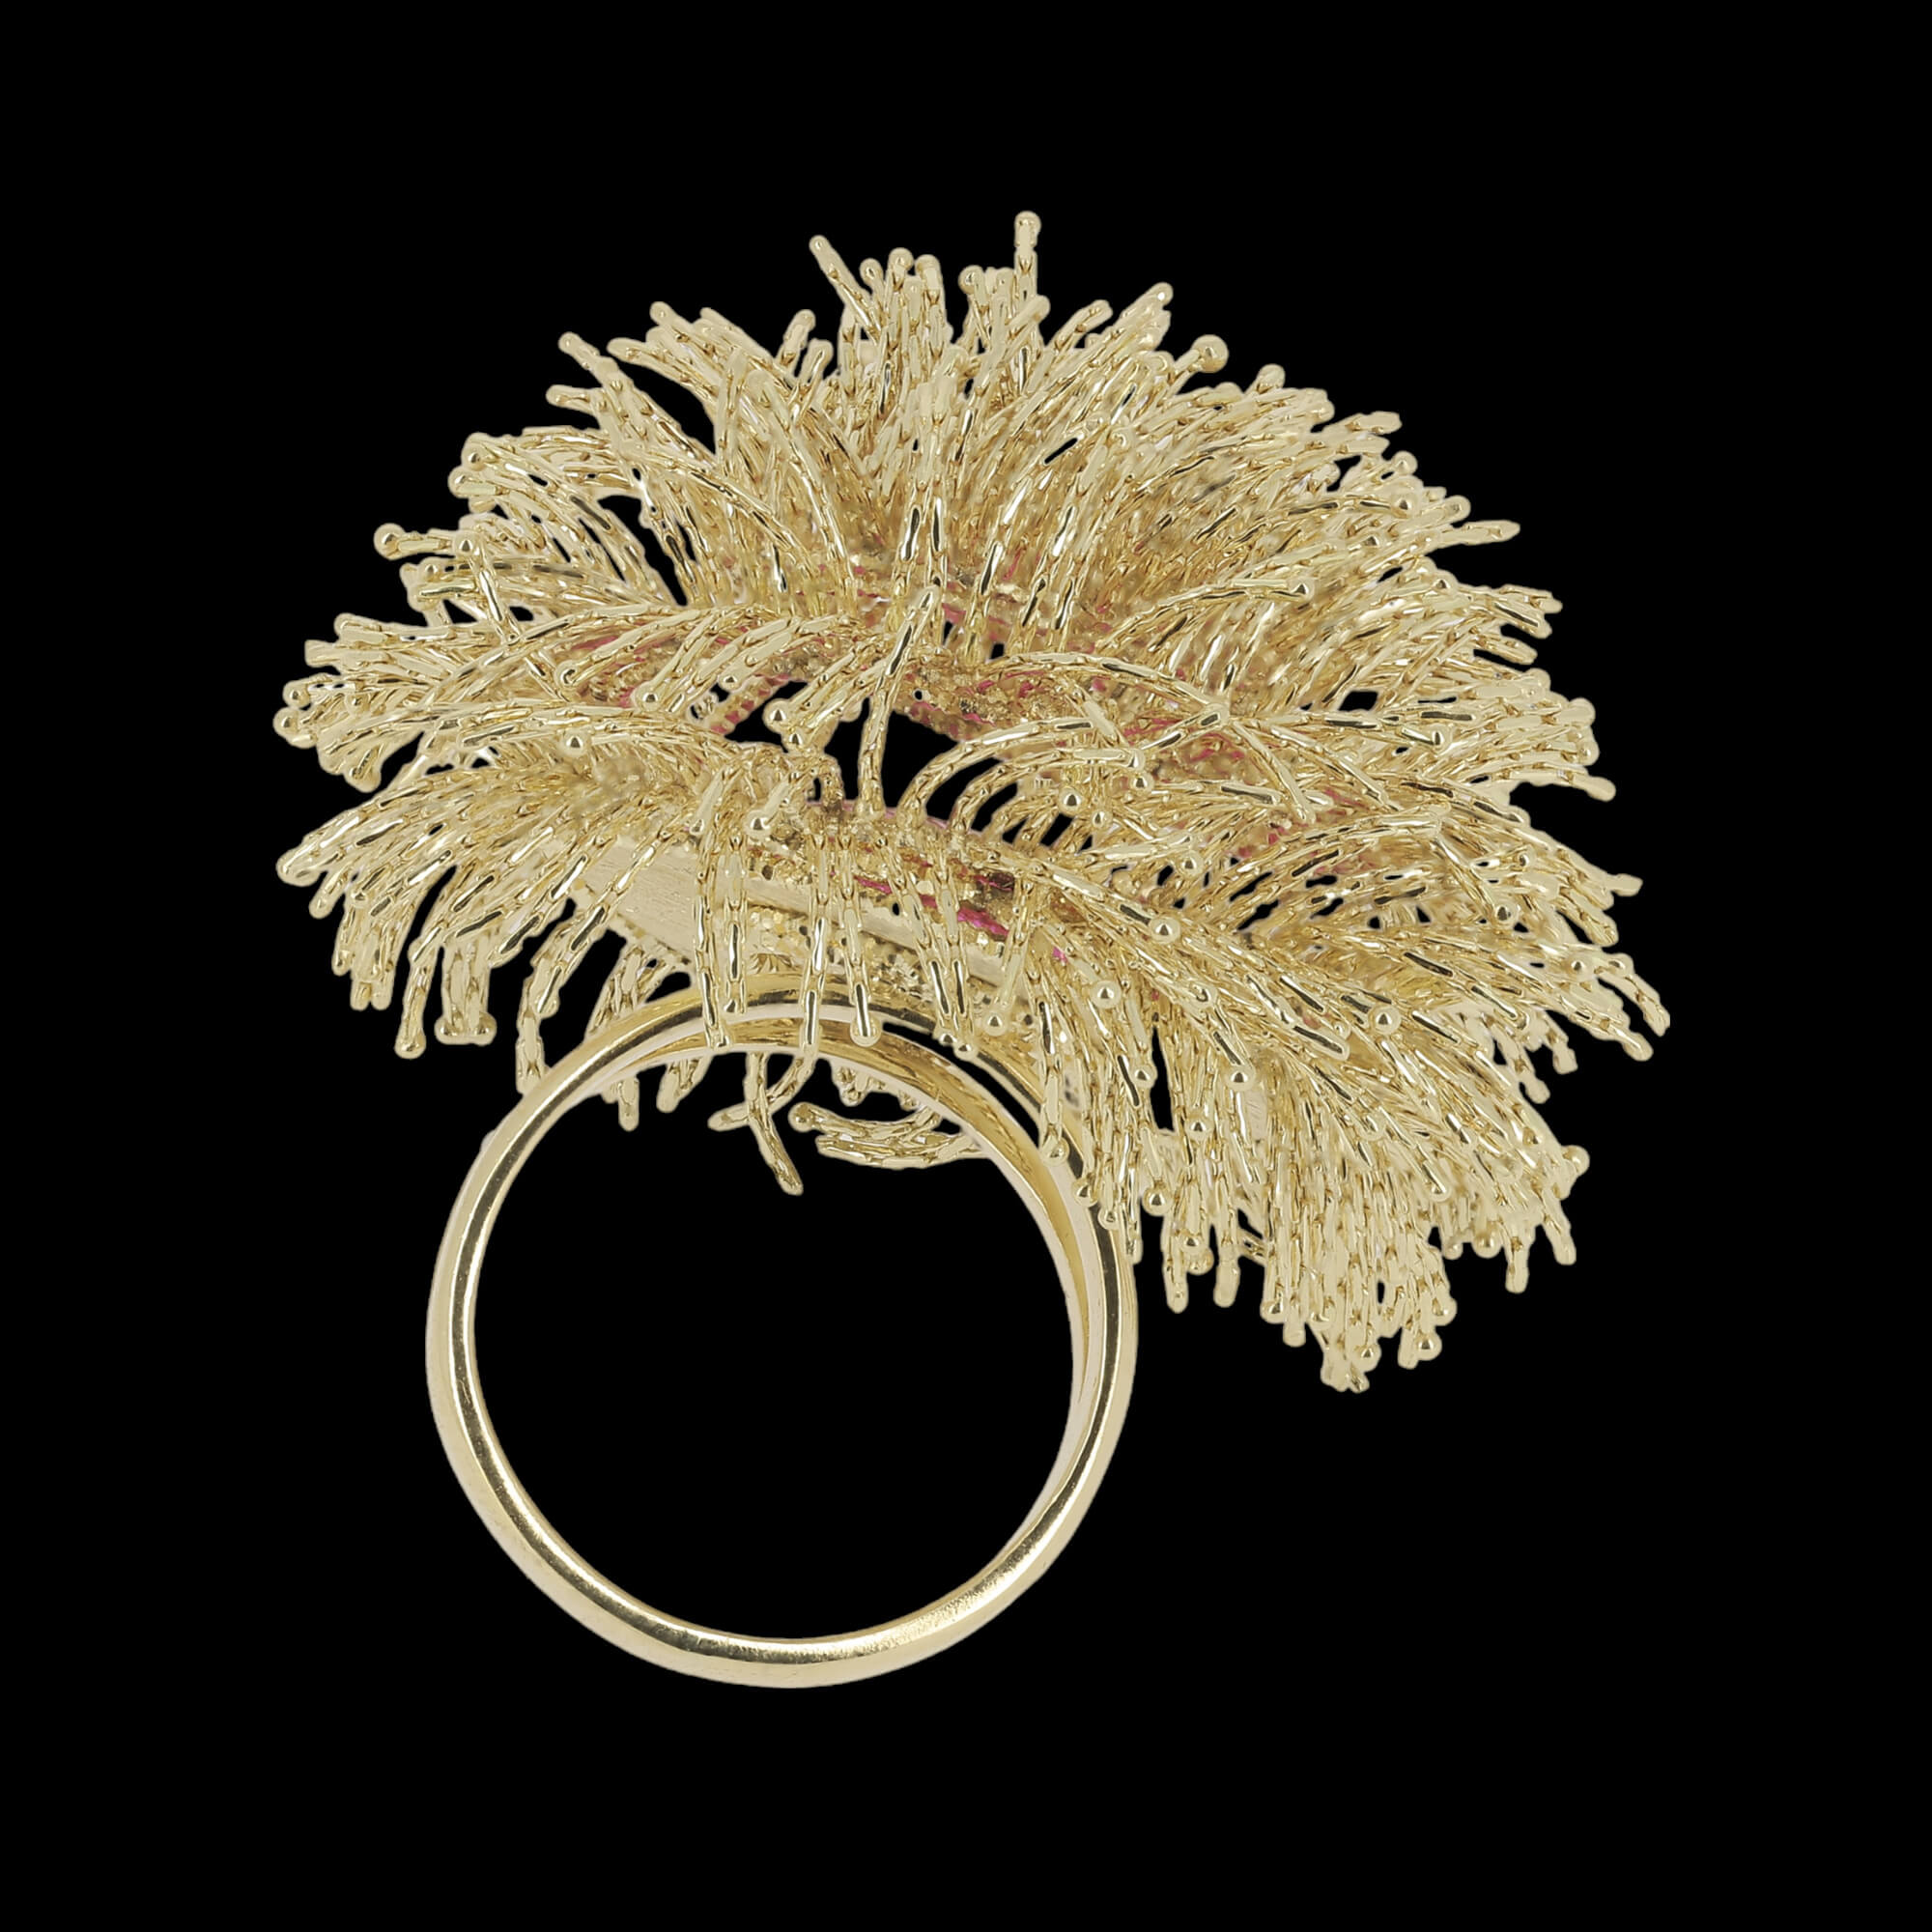 A large 18kt gold ring with fringes